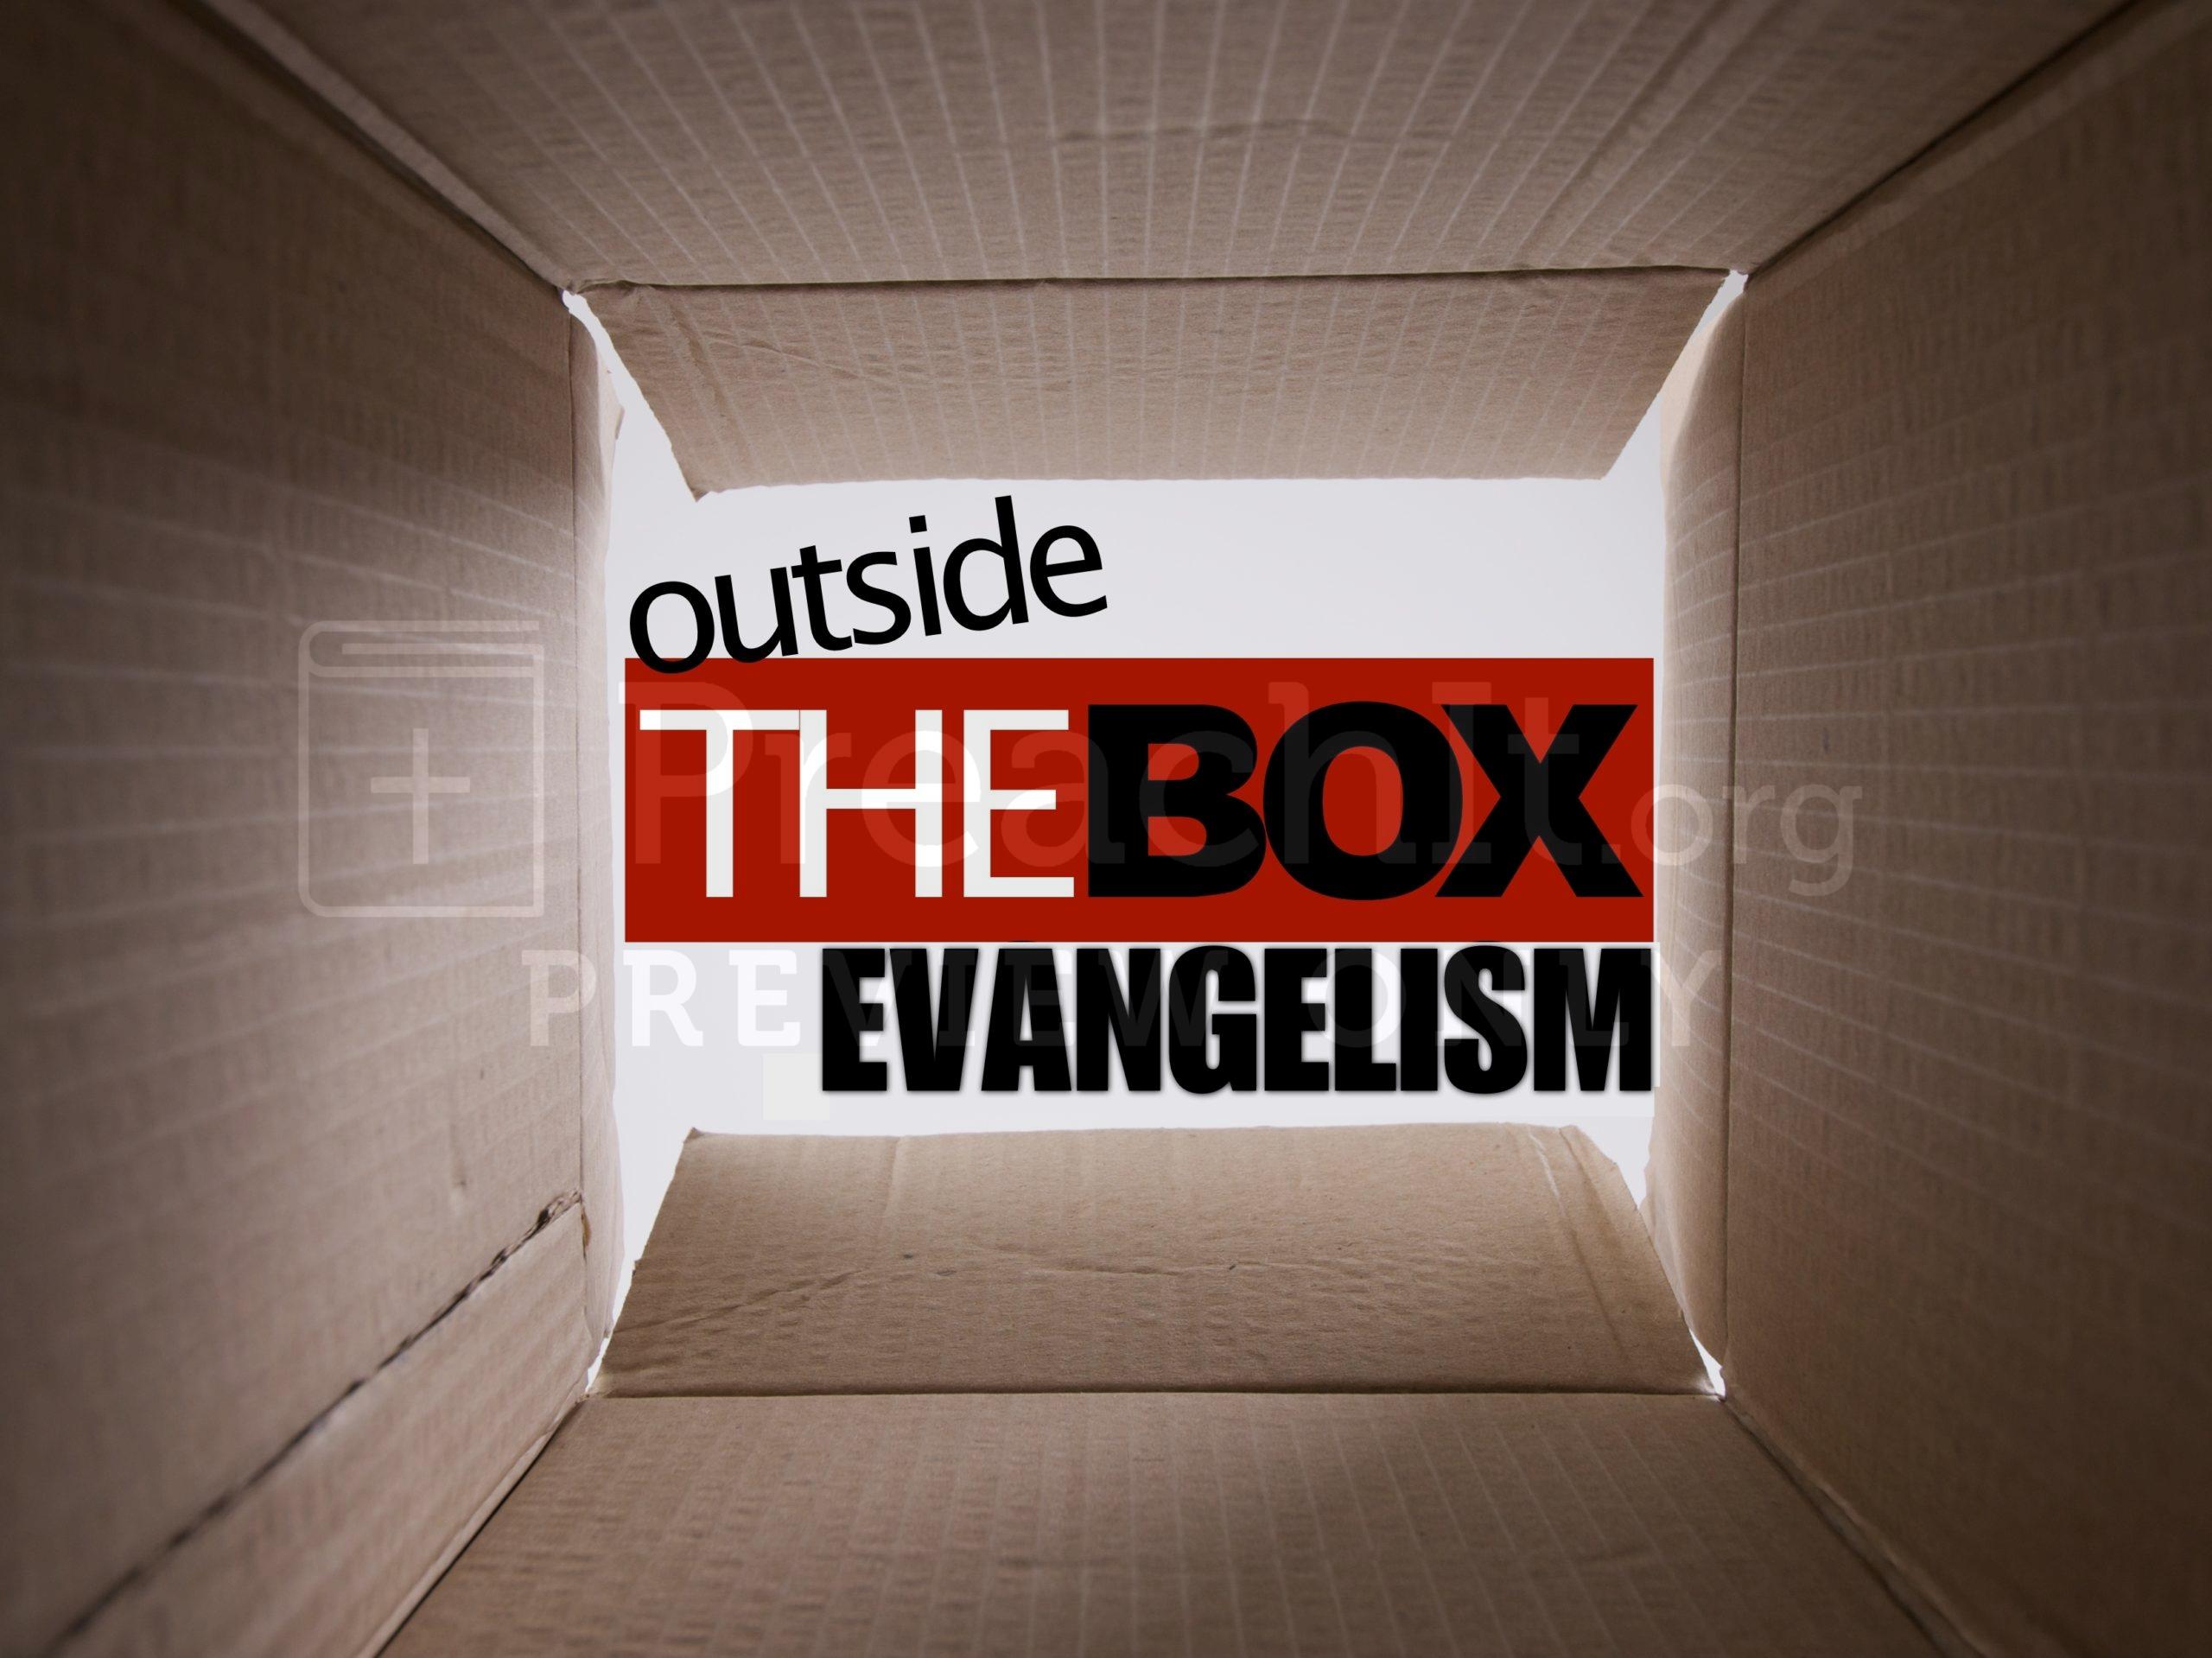 Lesson 3: Outside The Box - Evangelism